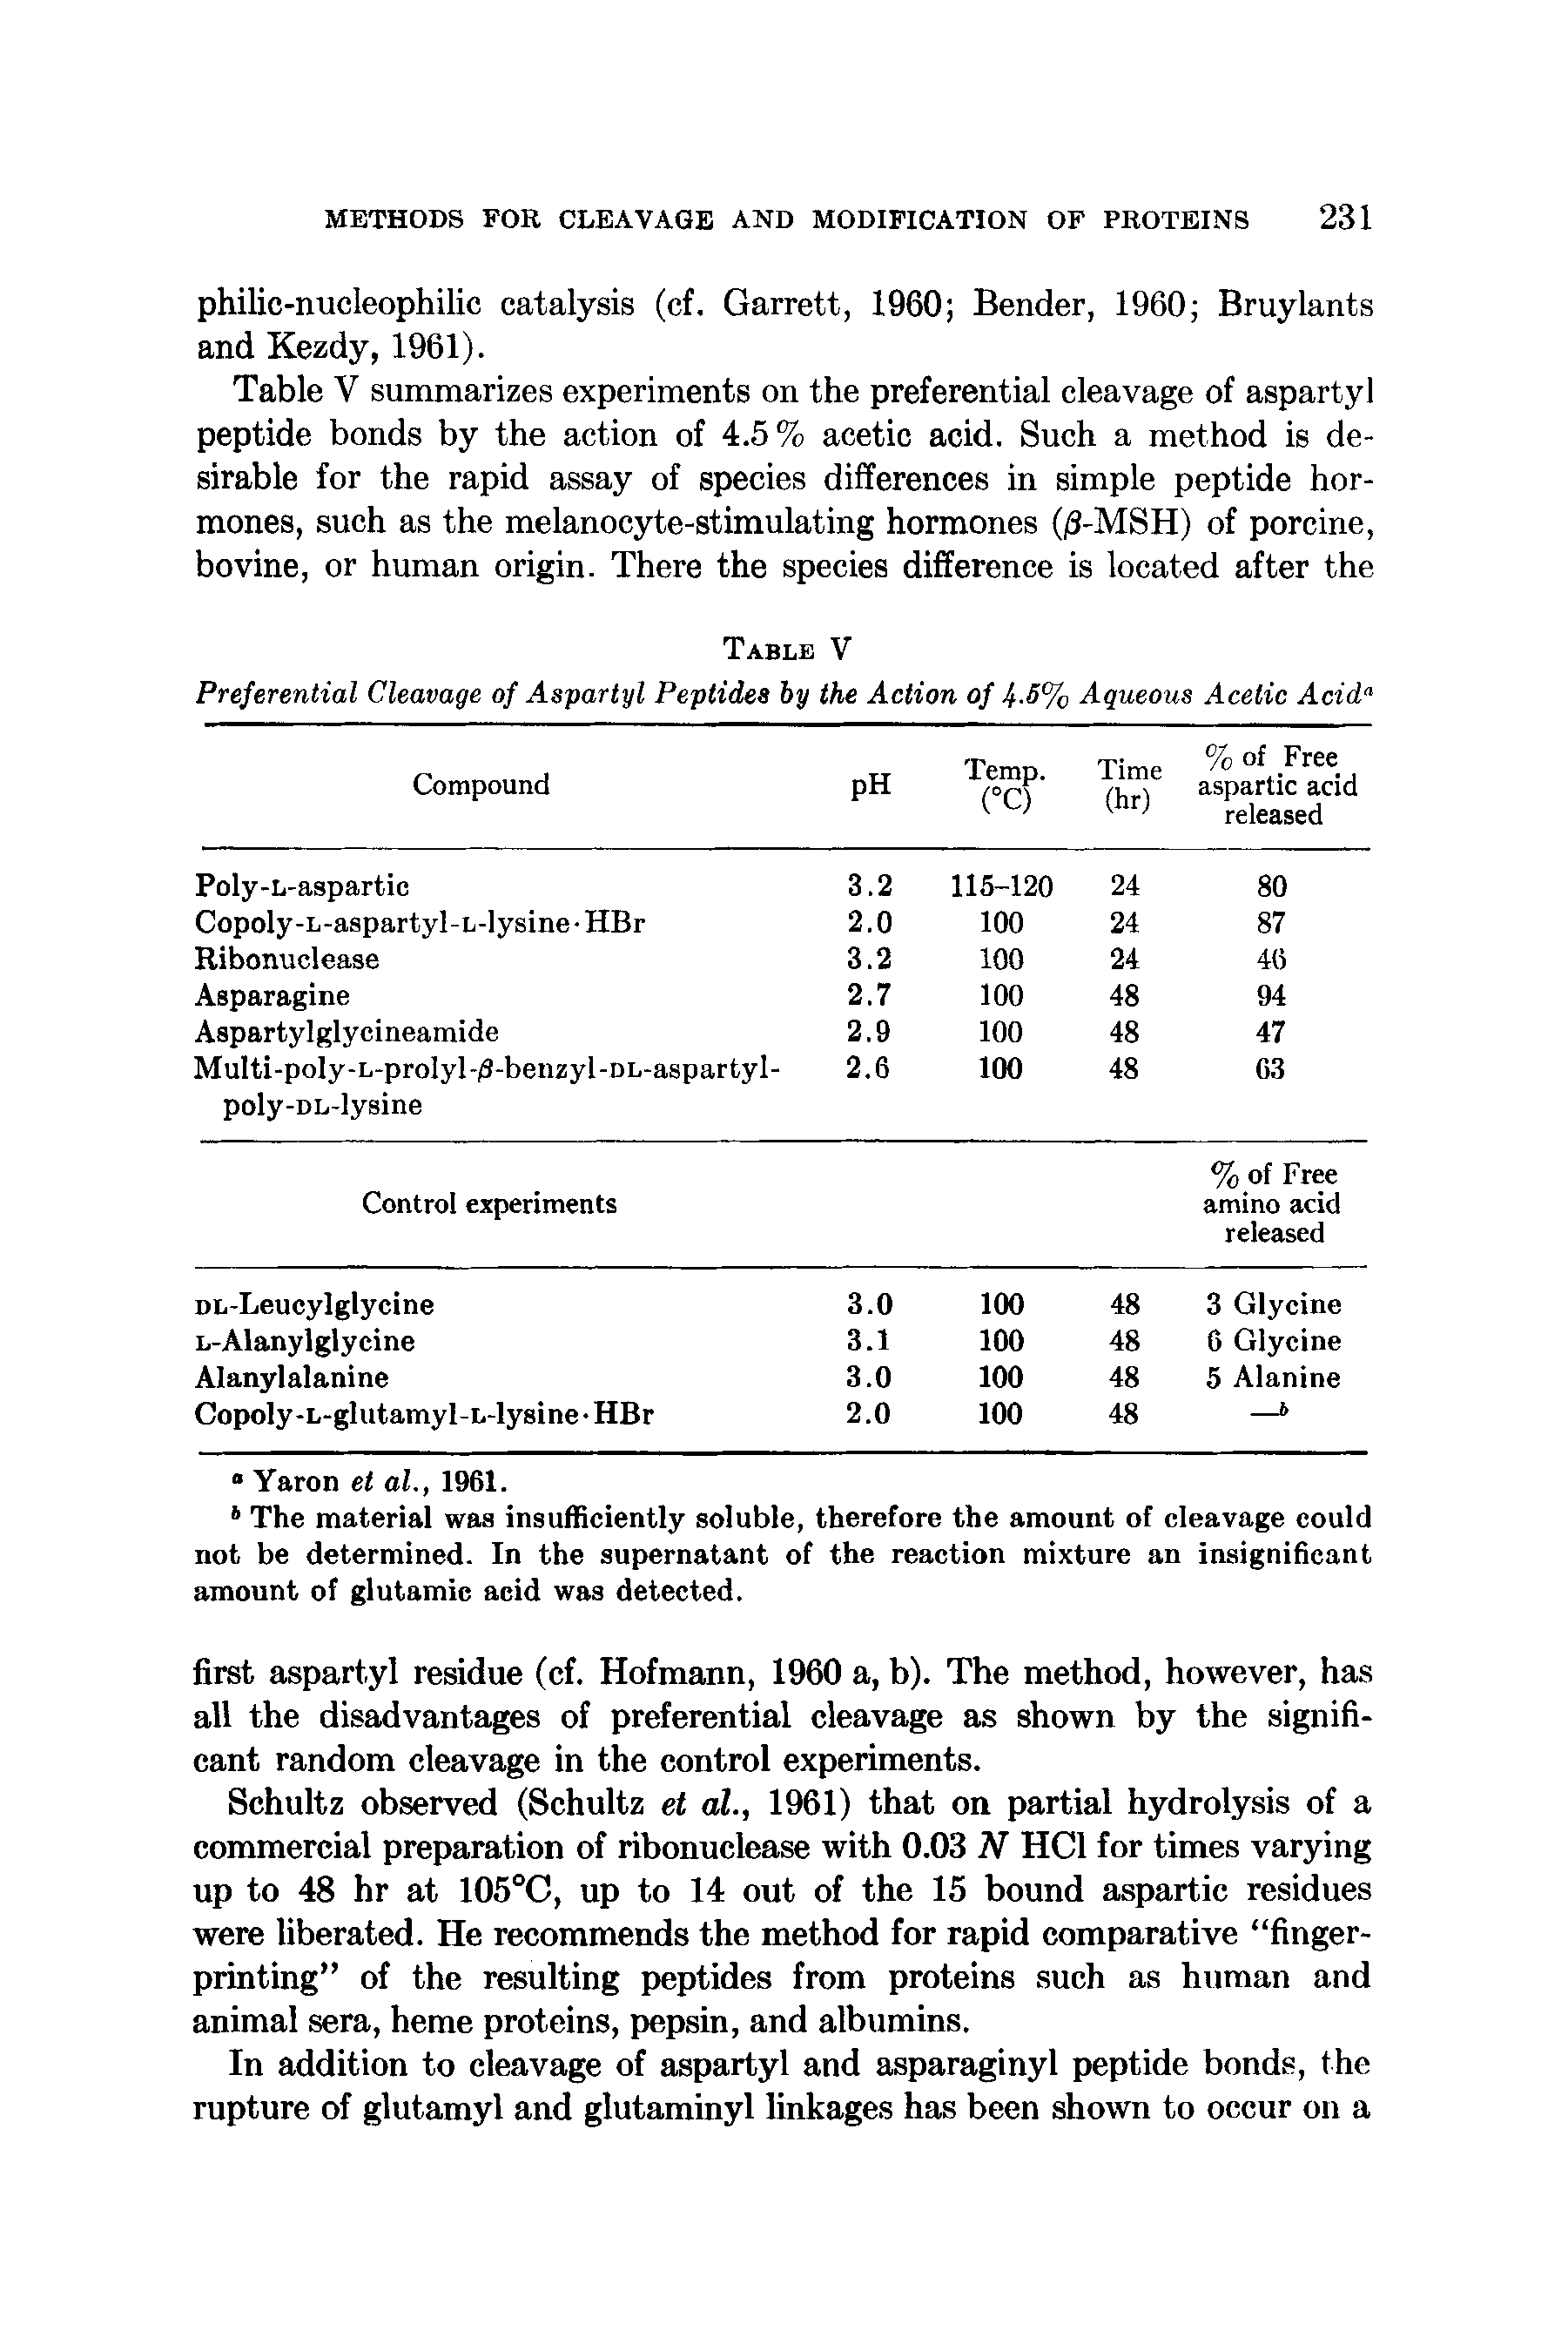 Table V summarizes experiments on the preferential cleavage of aspartyl peptide bonds by the action of 4.5% acetic acid. Such a method is desirable for the rapid assay of species differences in simple peptide hormones, such as the melanocyte-stimulating hormones (/3-MSH) of porcine, bovine, or human origin. There the species difference is located after the...